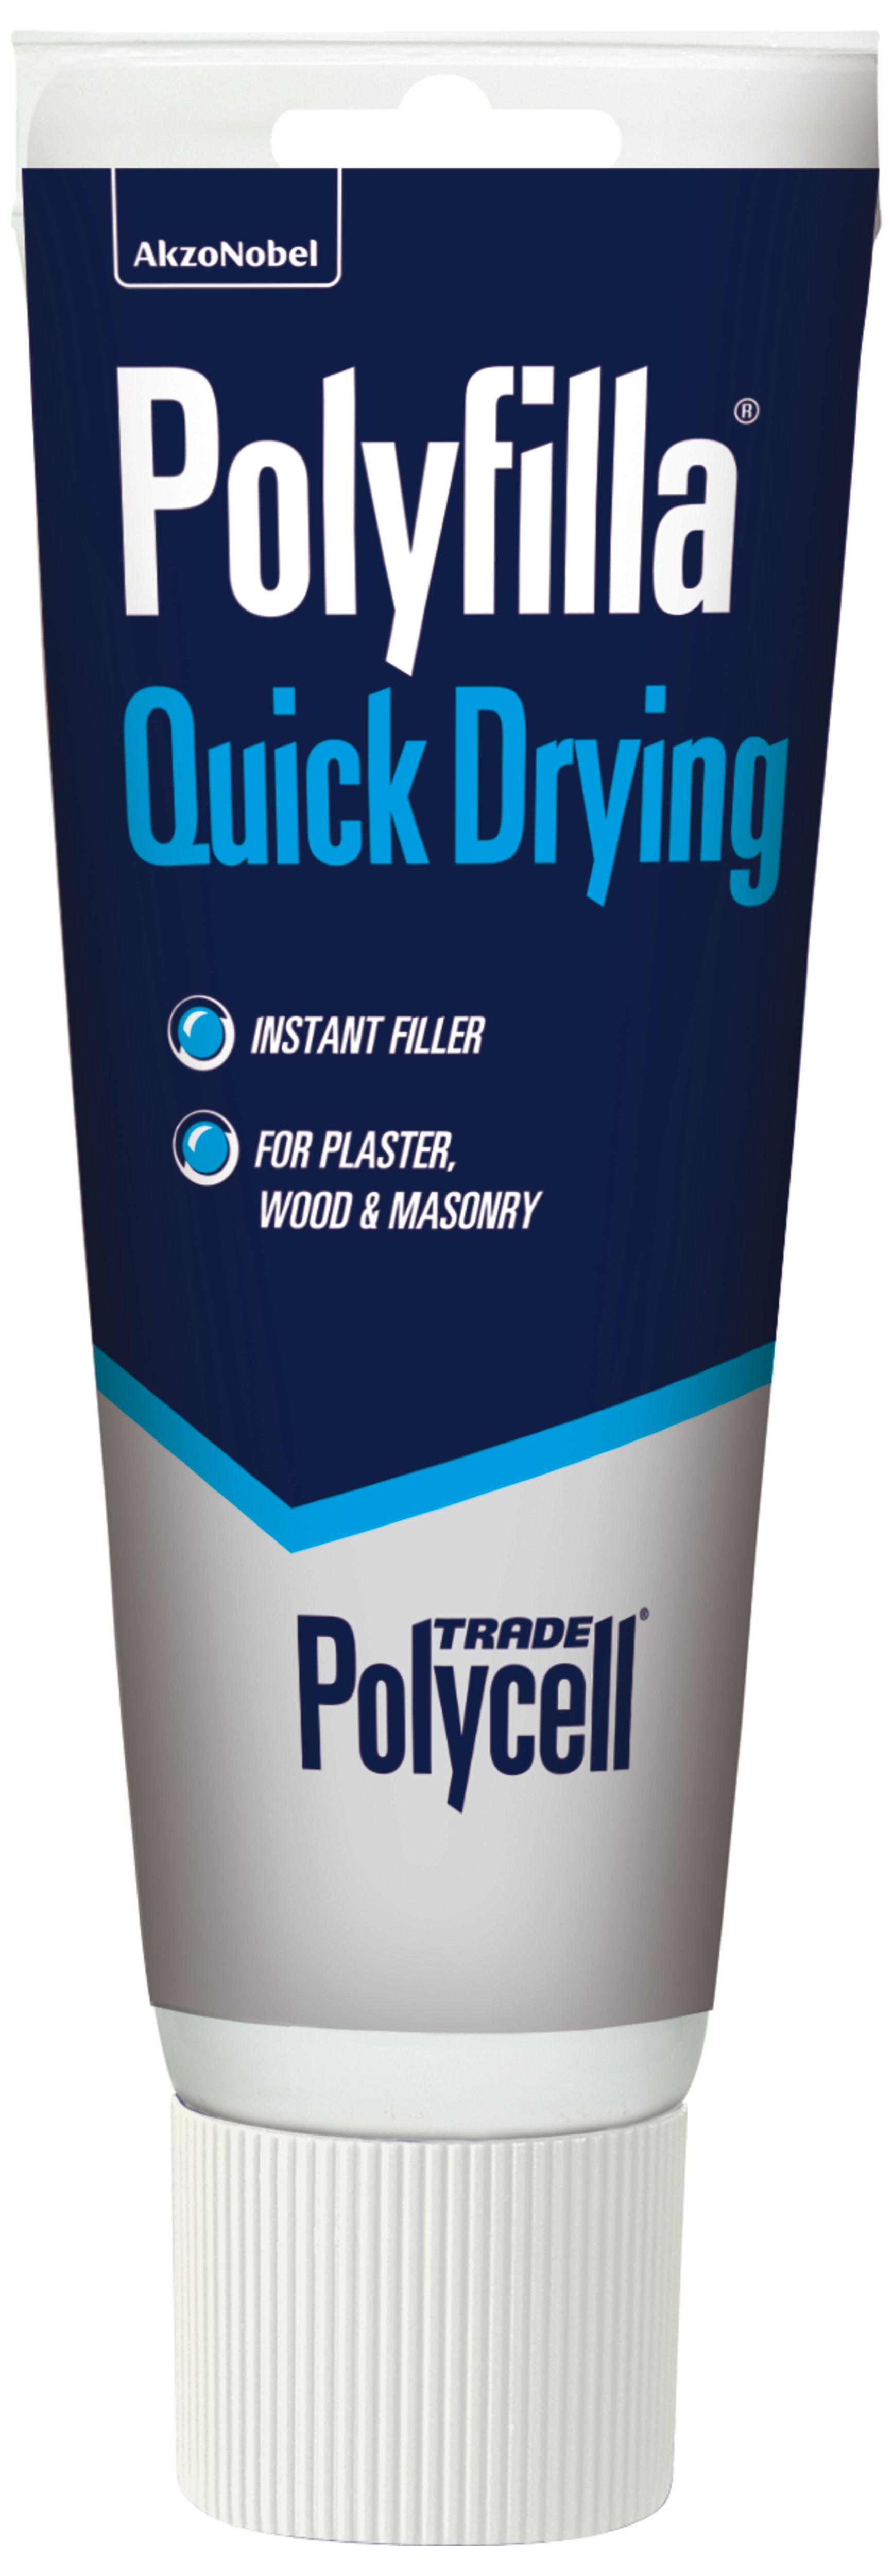 Image of Polycell Trade Polyfilla Quick Drying Filler - 330g